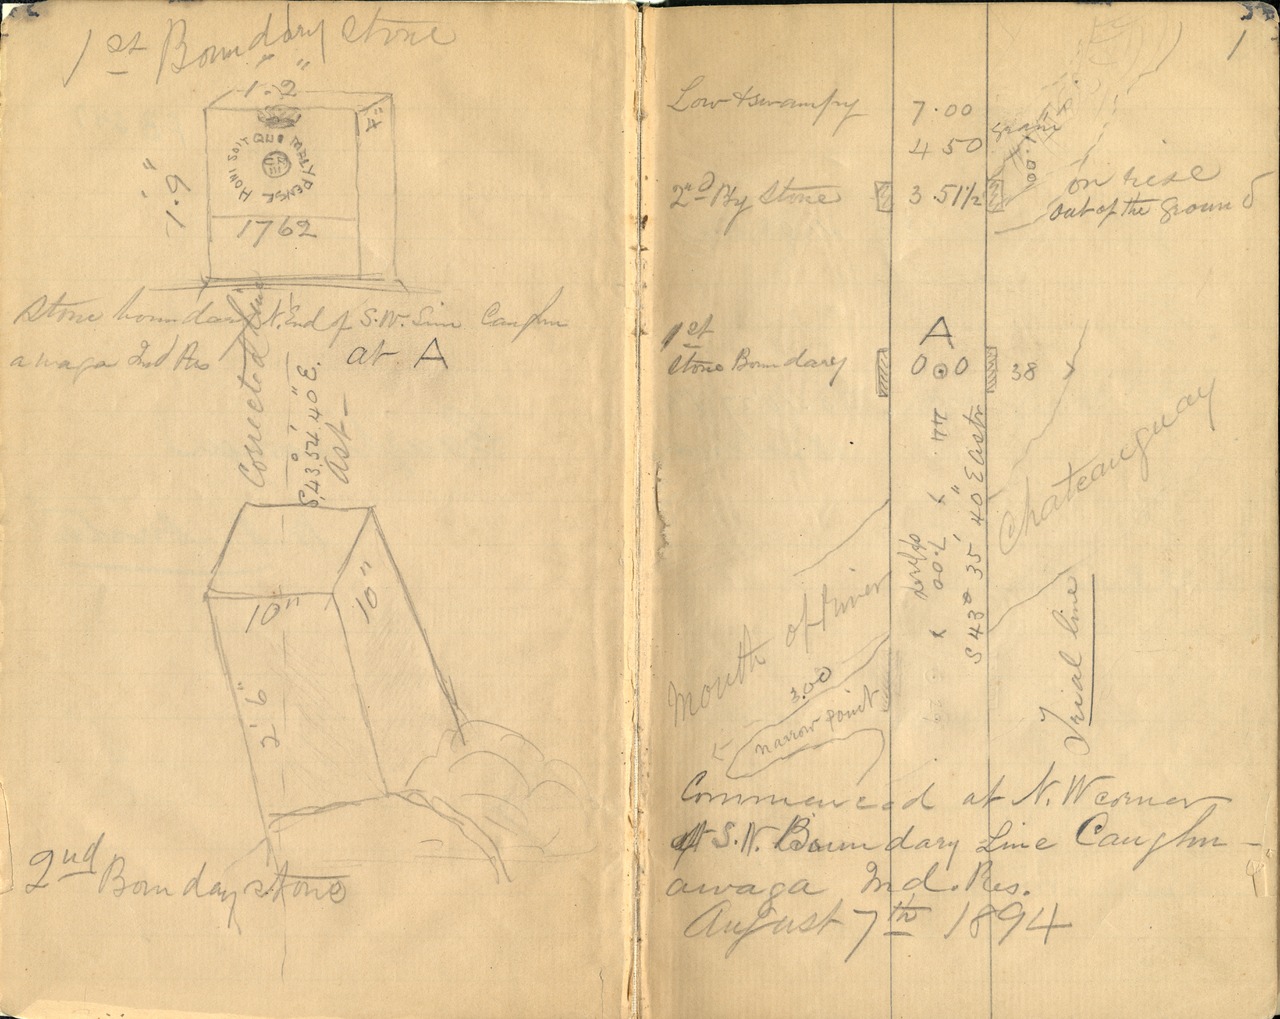 W.A. Austin's Field notes with sketch of 1762 marker by W.A. Austin Sept. 1894,